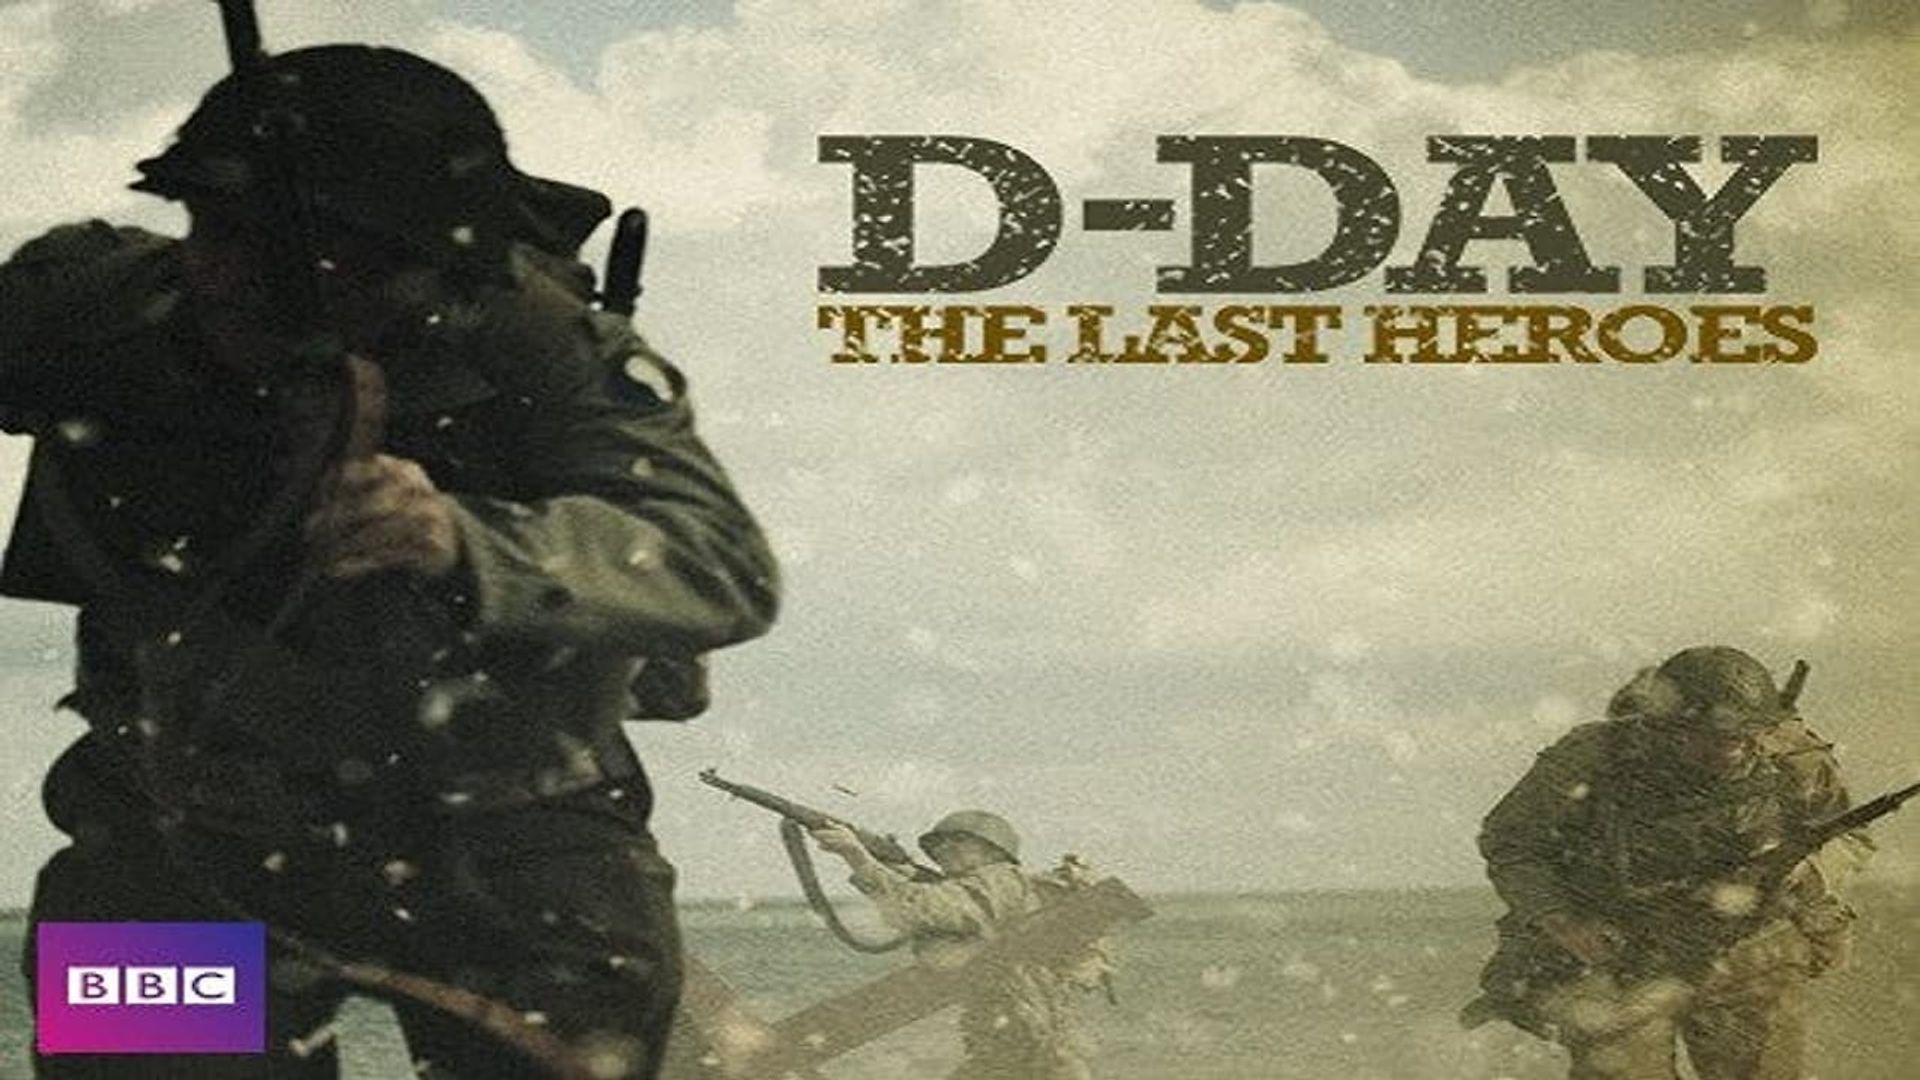 D-Day: The Last Heroes background